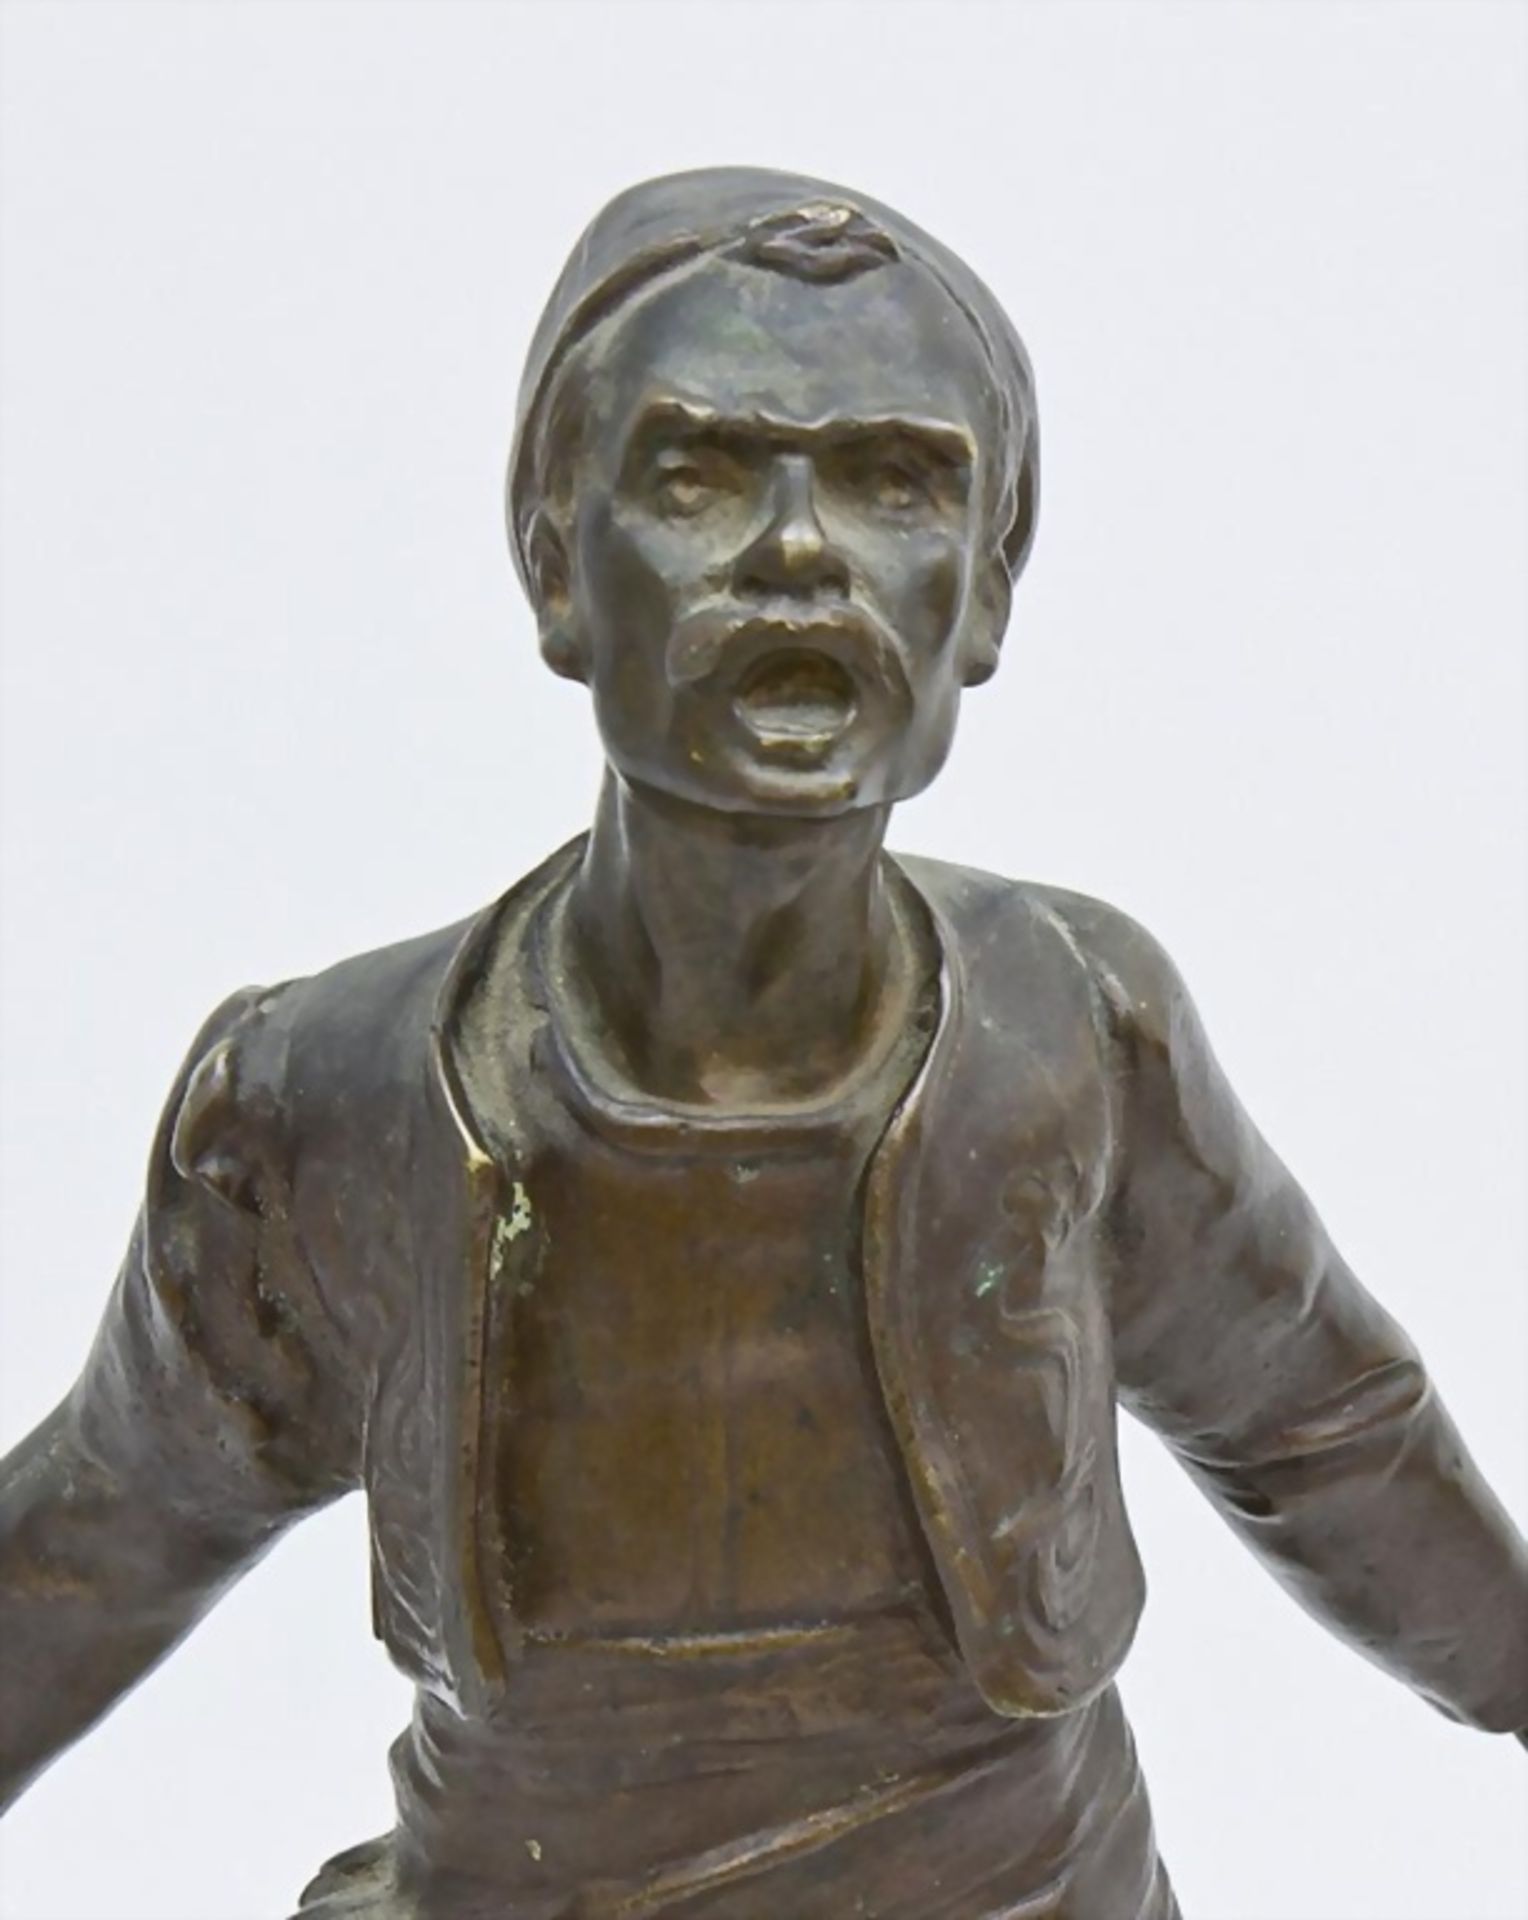 Orientale/Bronze Sculpture Of A Shouting Oriental Man, Georges Flamand, um 1900 - Image 5 of 5